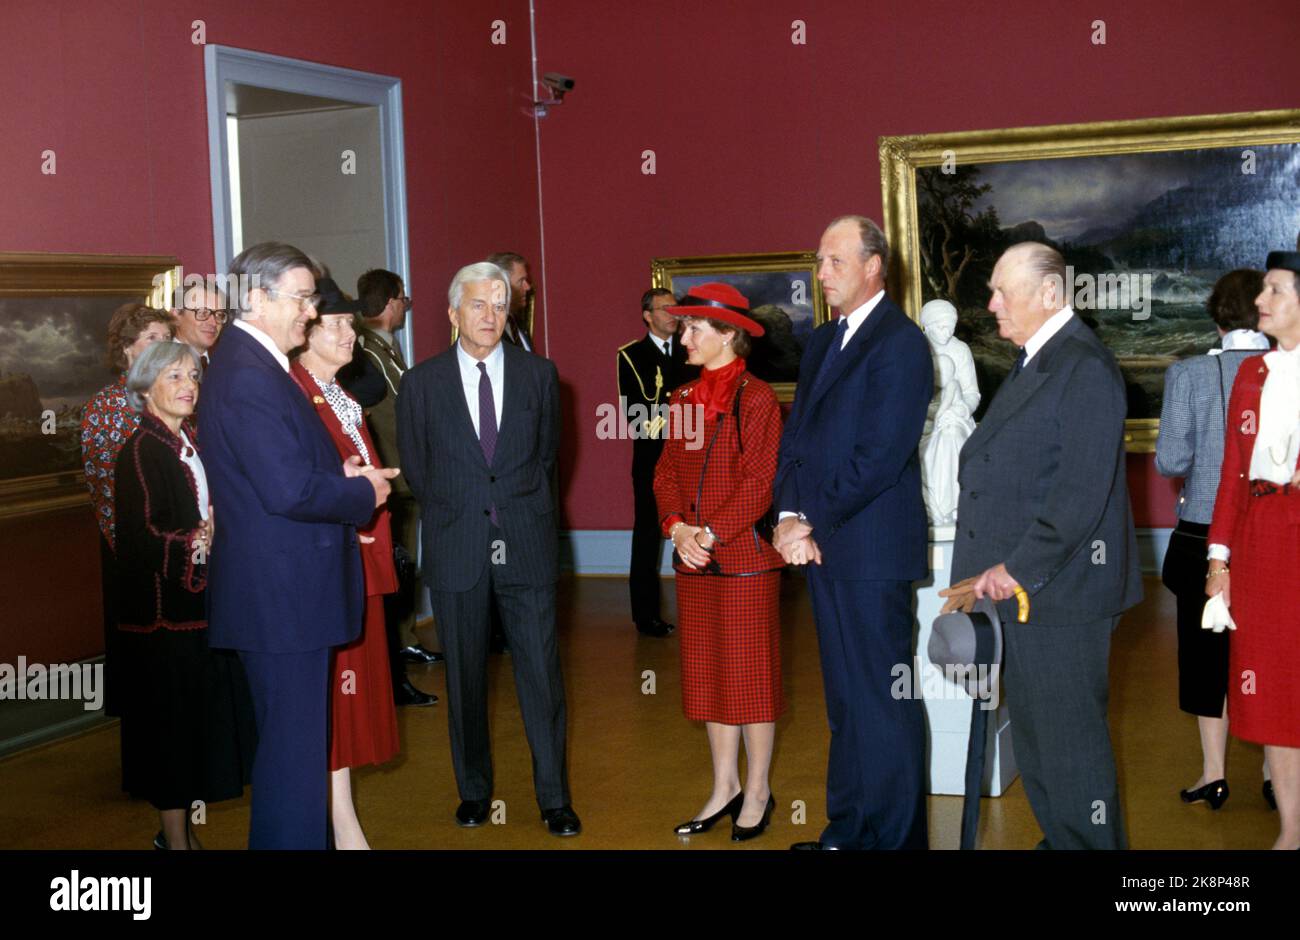 Oslo 19860925. West Germany's federal President Richard von Weizsäcker on a 4 day official visit to Norway. King Olav and Federal President Richard von Weizsäcker during the visit to the National Gallery. Eg. We see director Knut Berg, Marianne Weizsäcker, Richard von Weizsäcker, Crown Princess Sonja in red suit and hat, Crown Prince Harald and King Olav. Photo: Morten Hvaal NTB / NTB Stock Photo